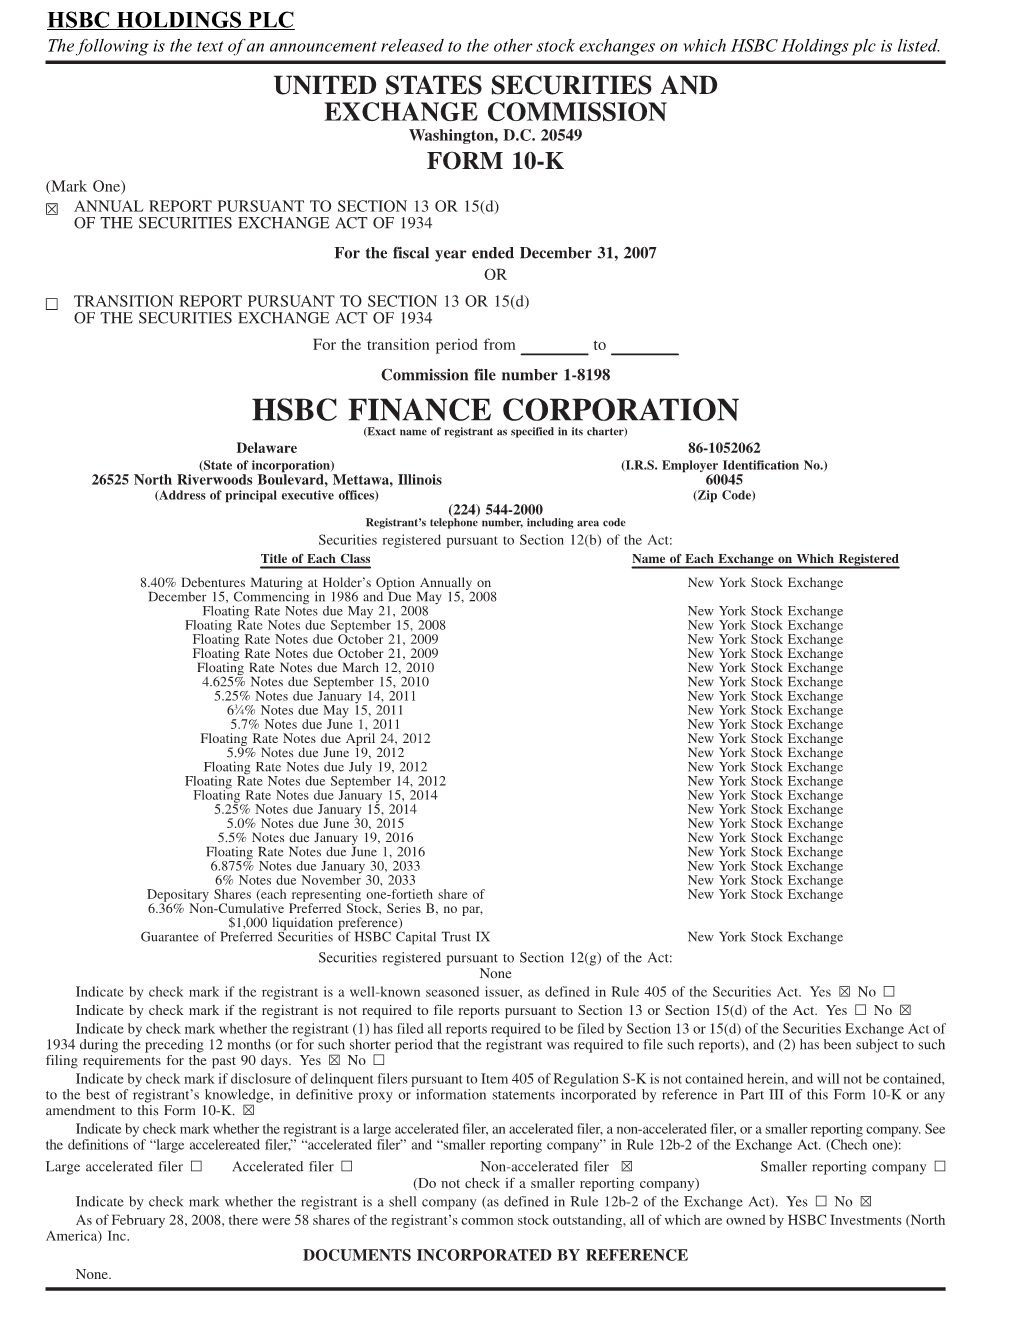 HSBC FINANCE CORPORATION (Exact Name of Registrant As Specified in Its Charter) Delaware 86-1052062 (State of Incorporation) (I.R.S